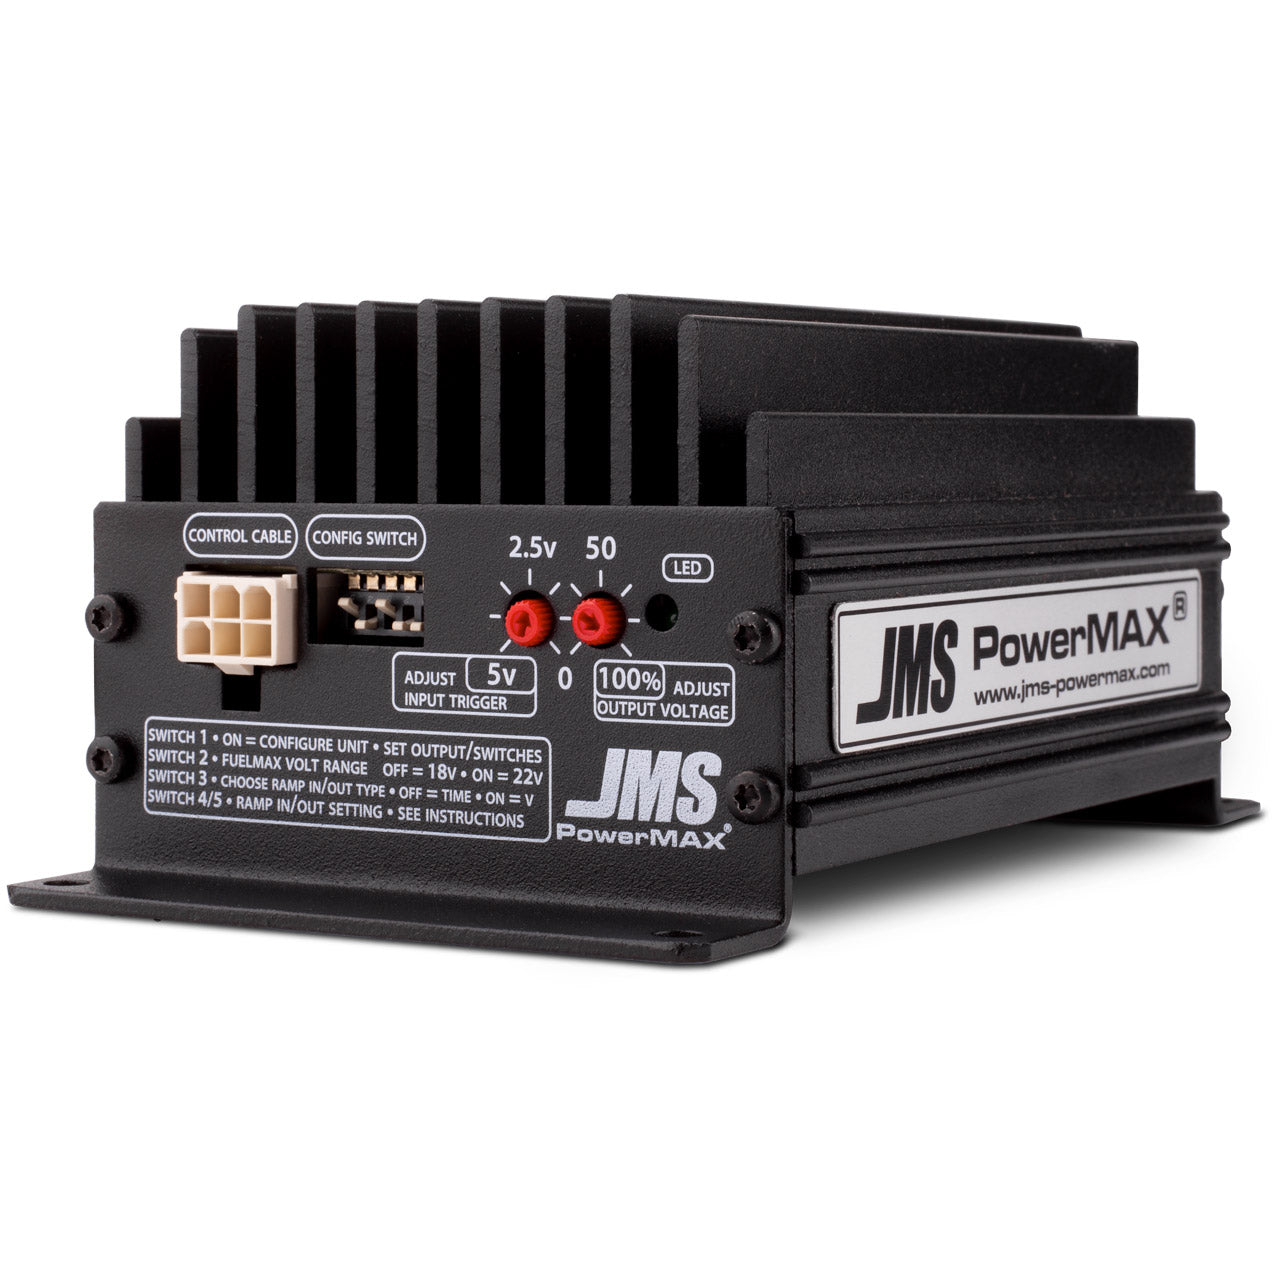 JMS FuelMAX - Fuel Pump Voltage Booster V2 - Plug and Play Dual Output (Activation - MAF/MAP/TPS or Ground includes Ext pressure switch) P2020PPS20